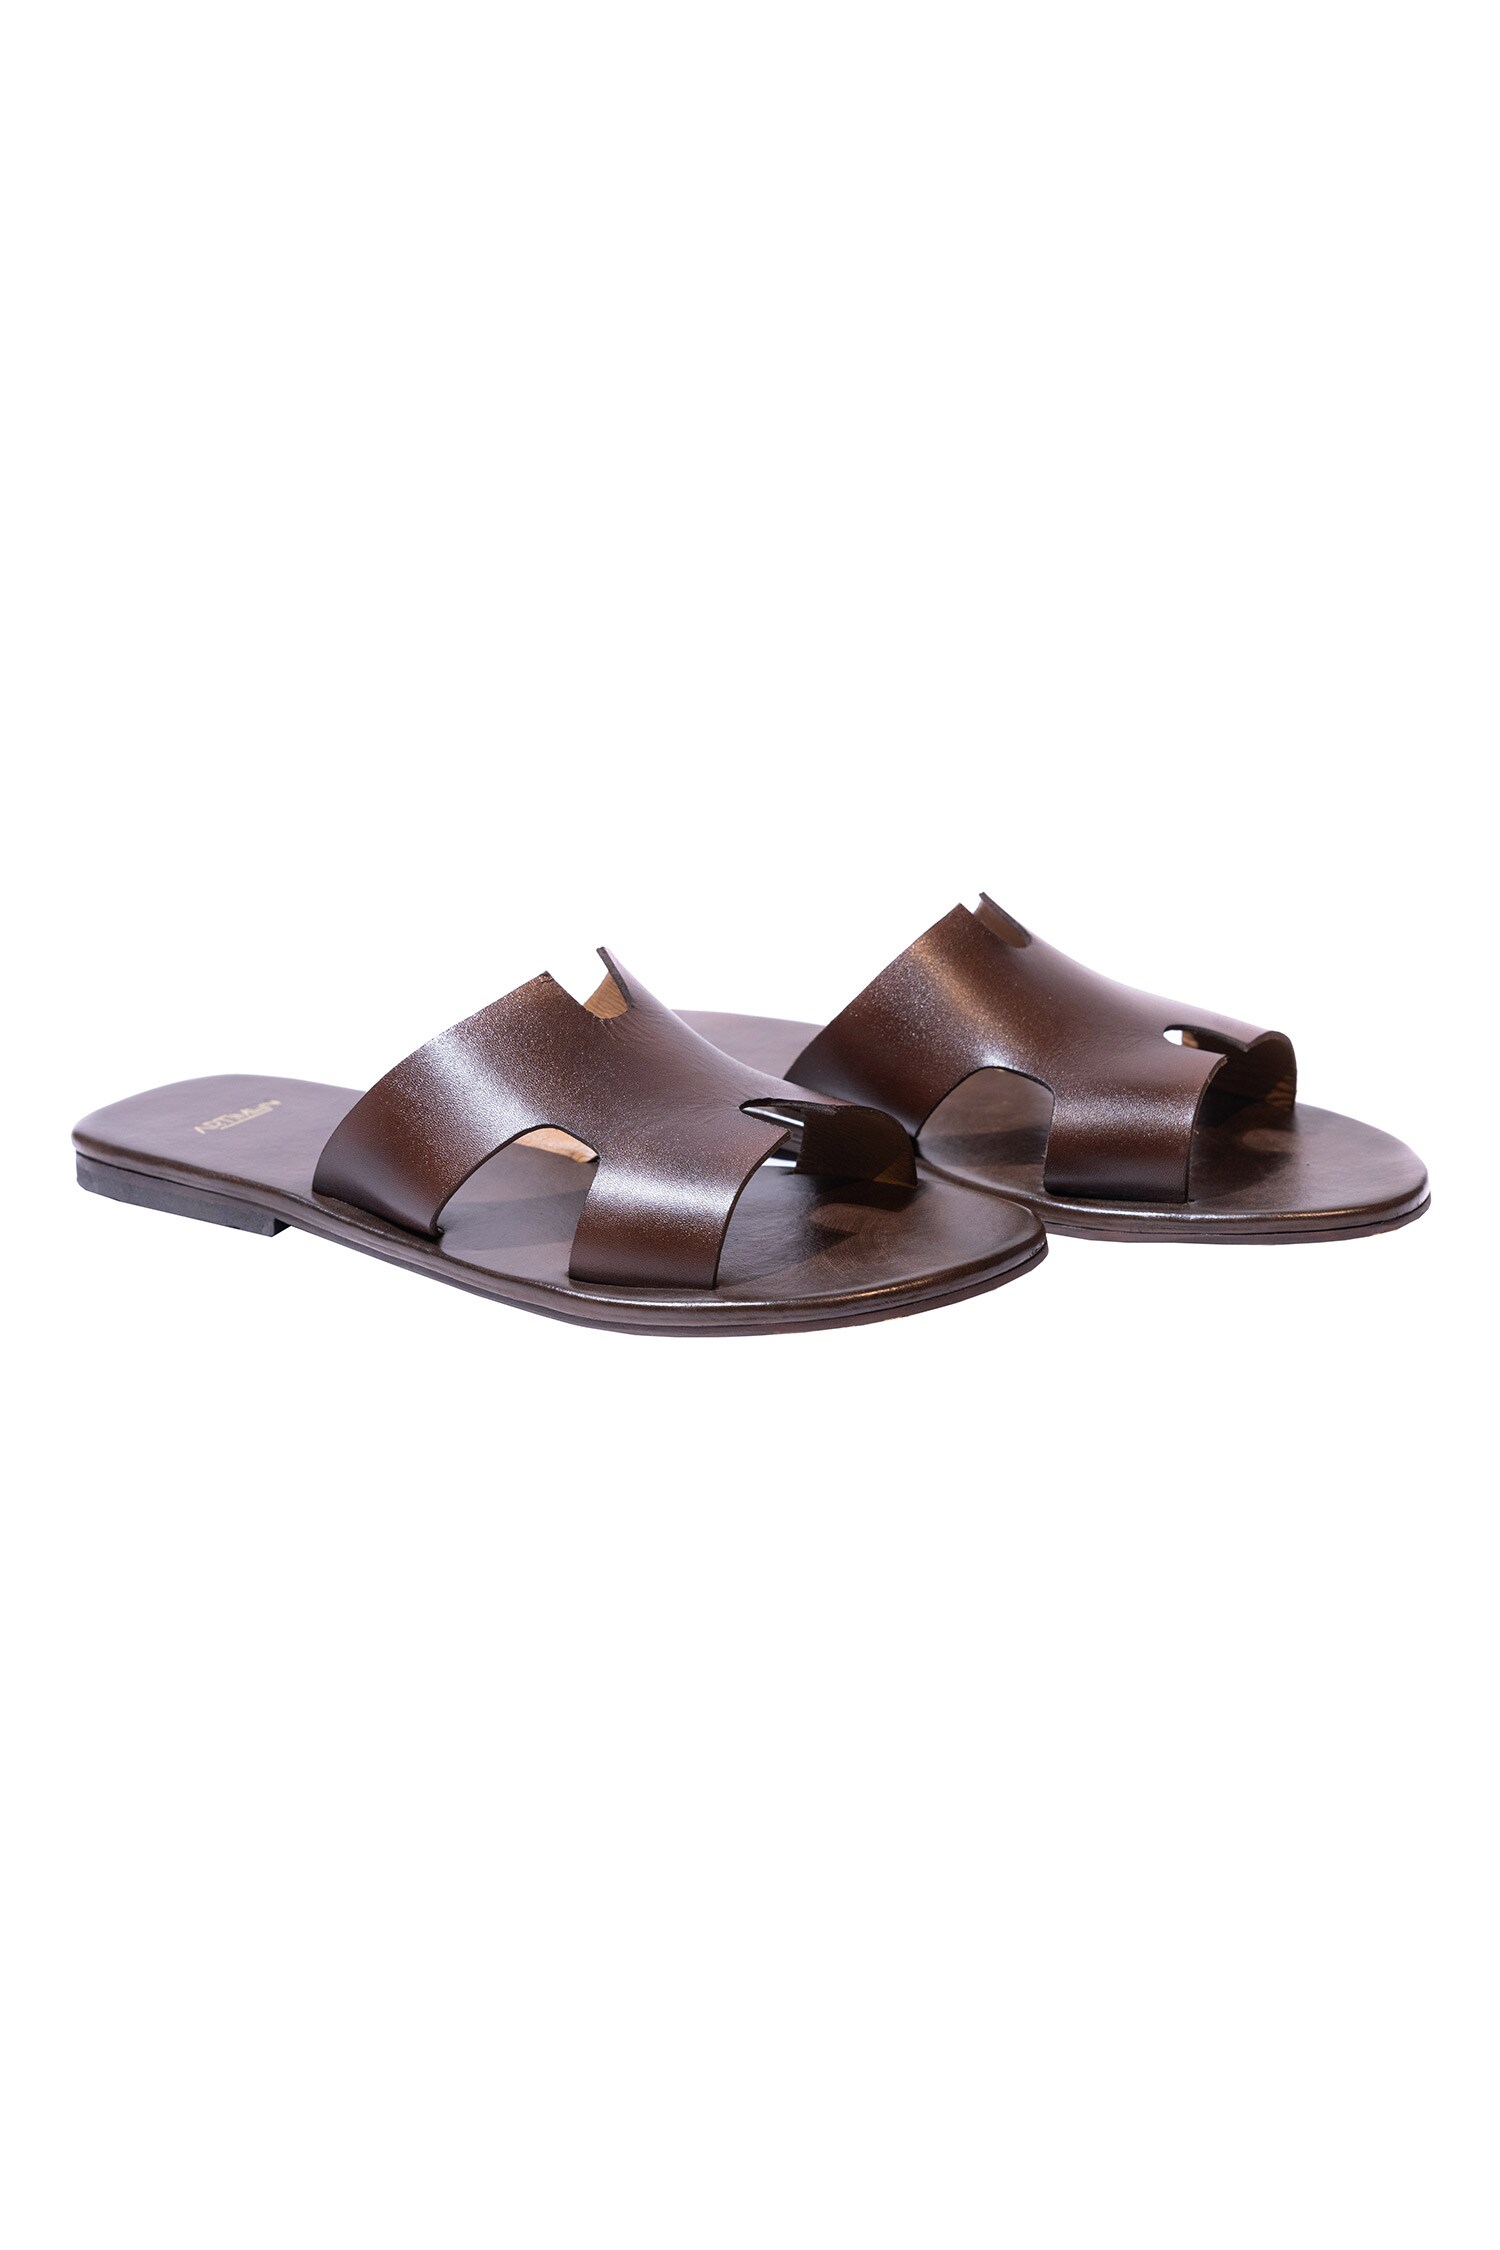 Artimen Brown Leather Handcrafted Cutout Sandals